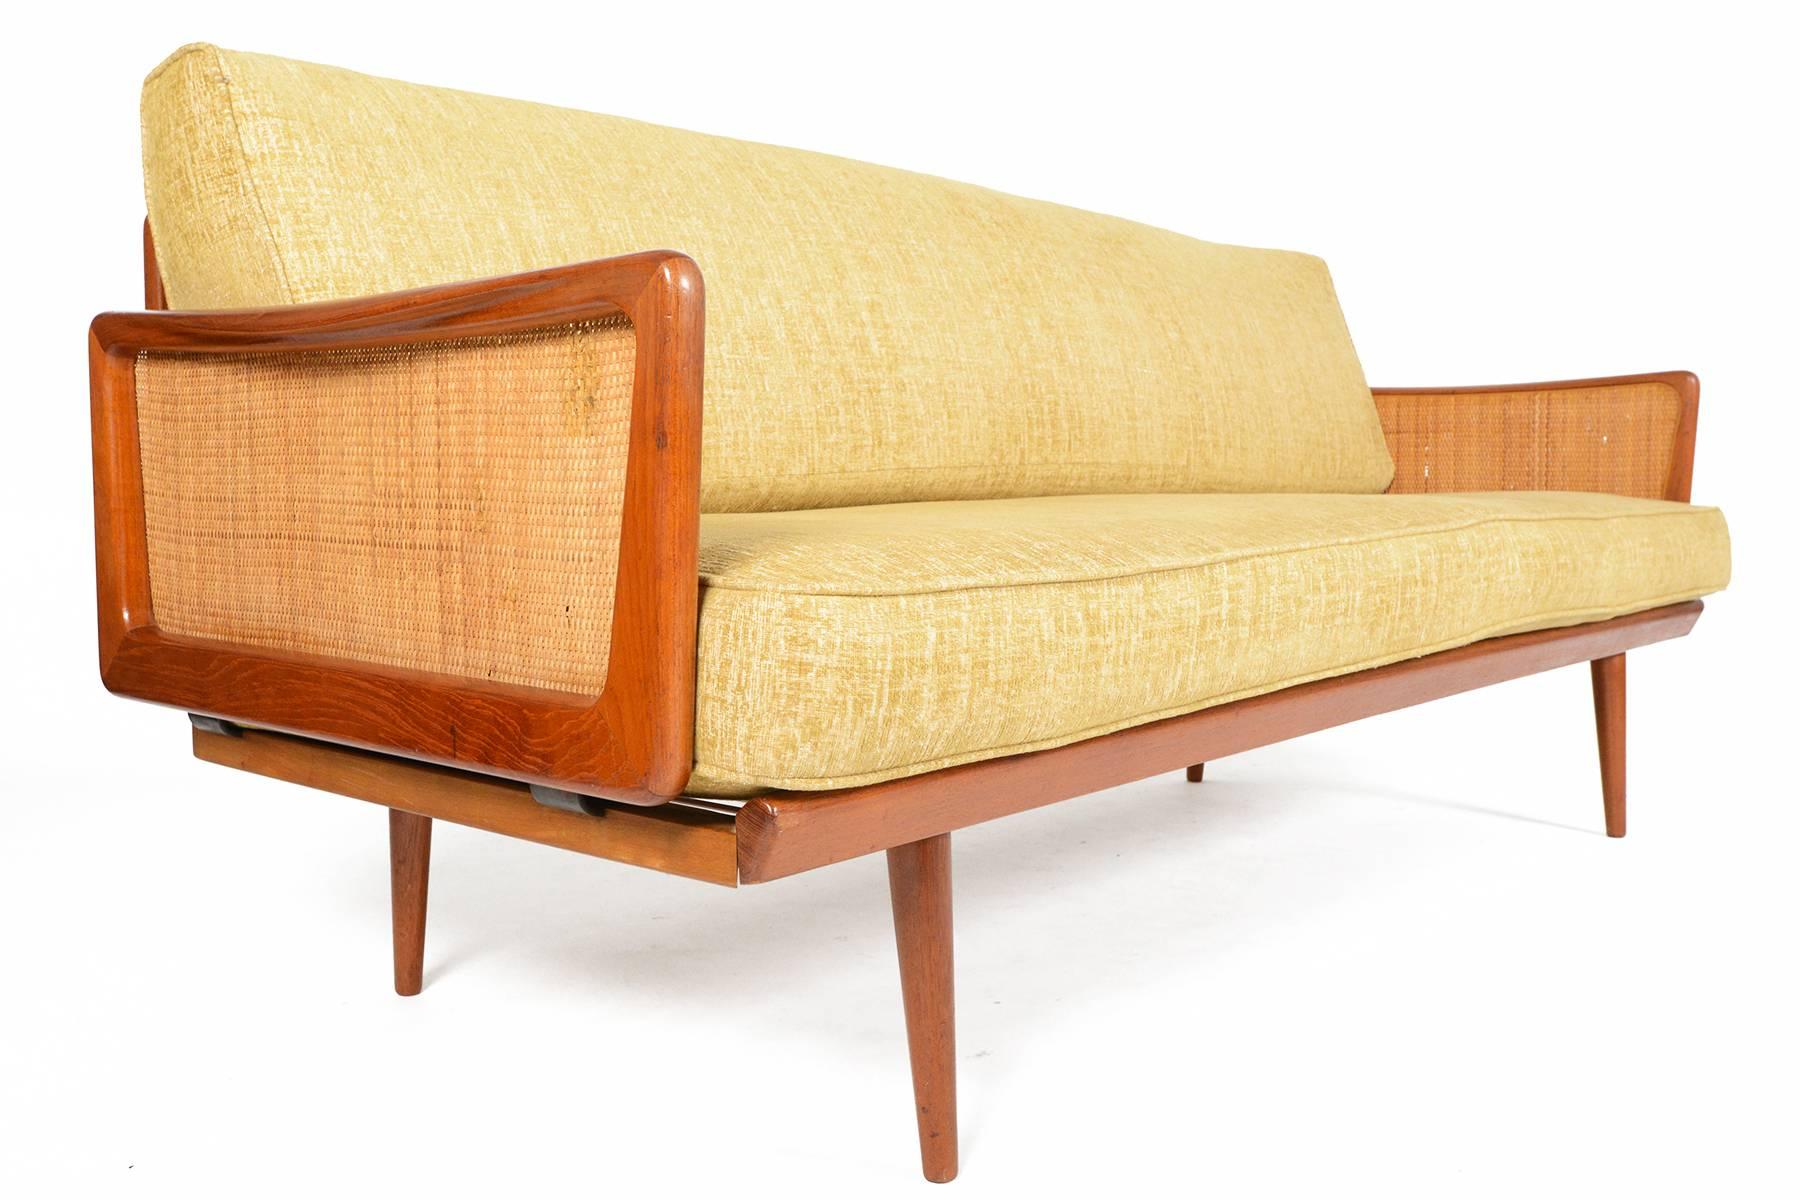 This fantastic Danish modern sofa was designed by Peter Hvidt in the 1960s. The solid teak frame features original cane arm panels inside the sculpted teak armrests and back paneling. Adorned with brass hardware. The two cushions are covered in a